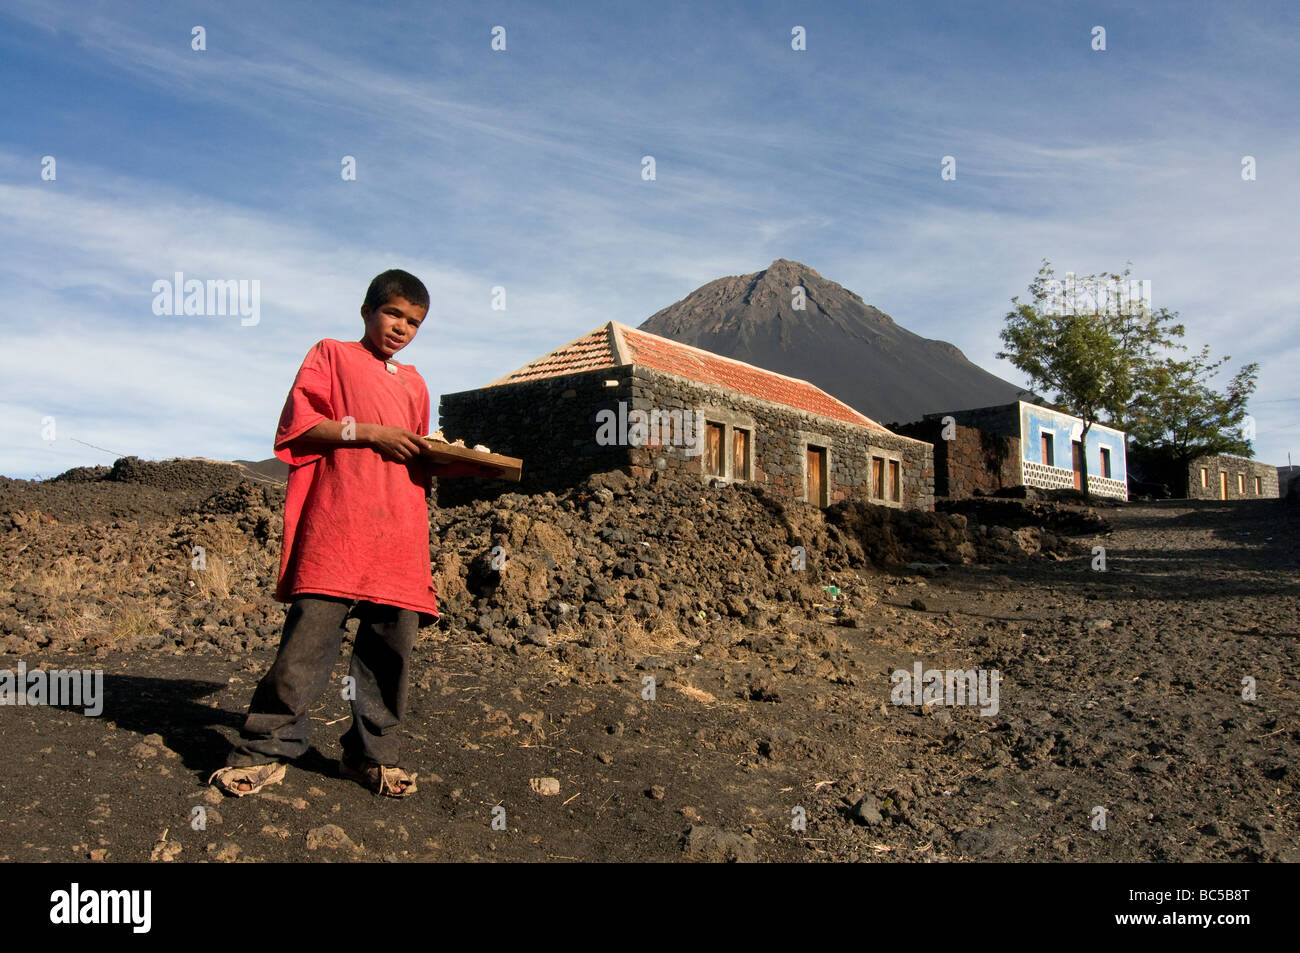 Native boy selling something in front of his house vulcano in background Fogo Cabo Verde Africa Stock Photo